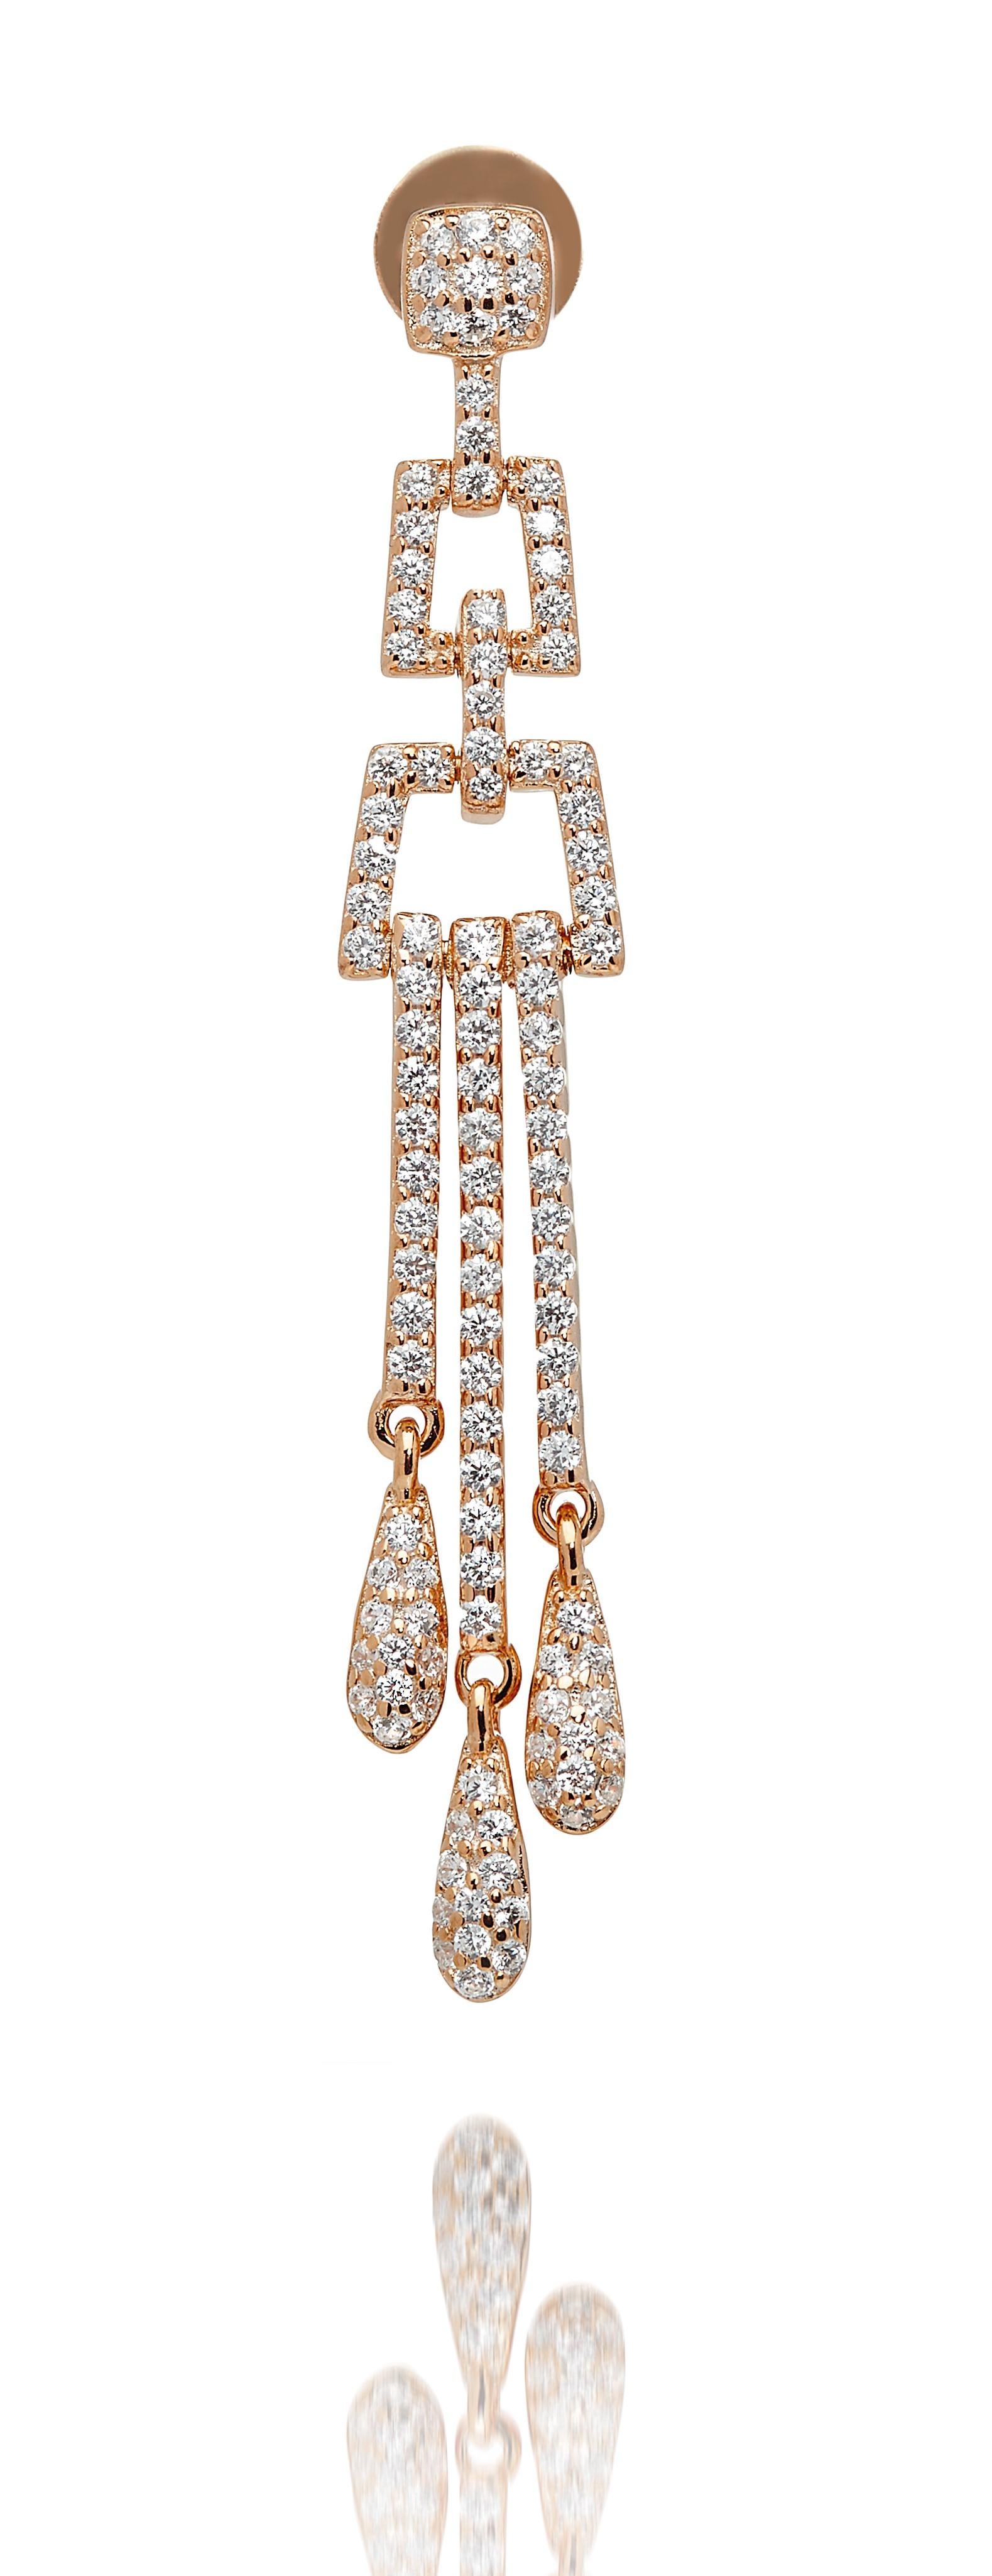 2.68 Carat Cubic Zirconia Rose Gold Art Deco Style Chandelier Drop Earrings In New Condition For Sale In London, GB